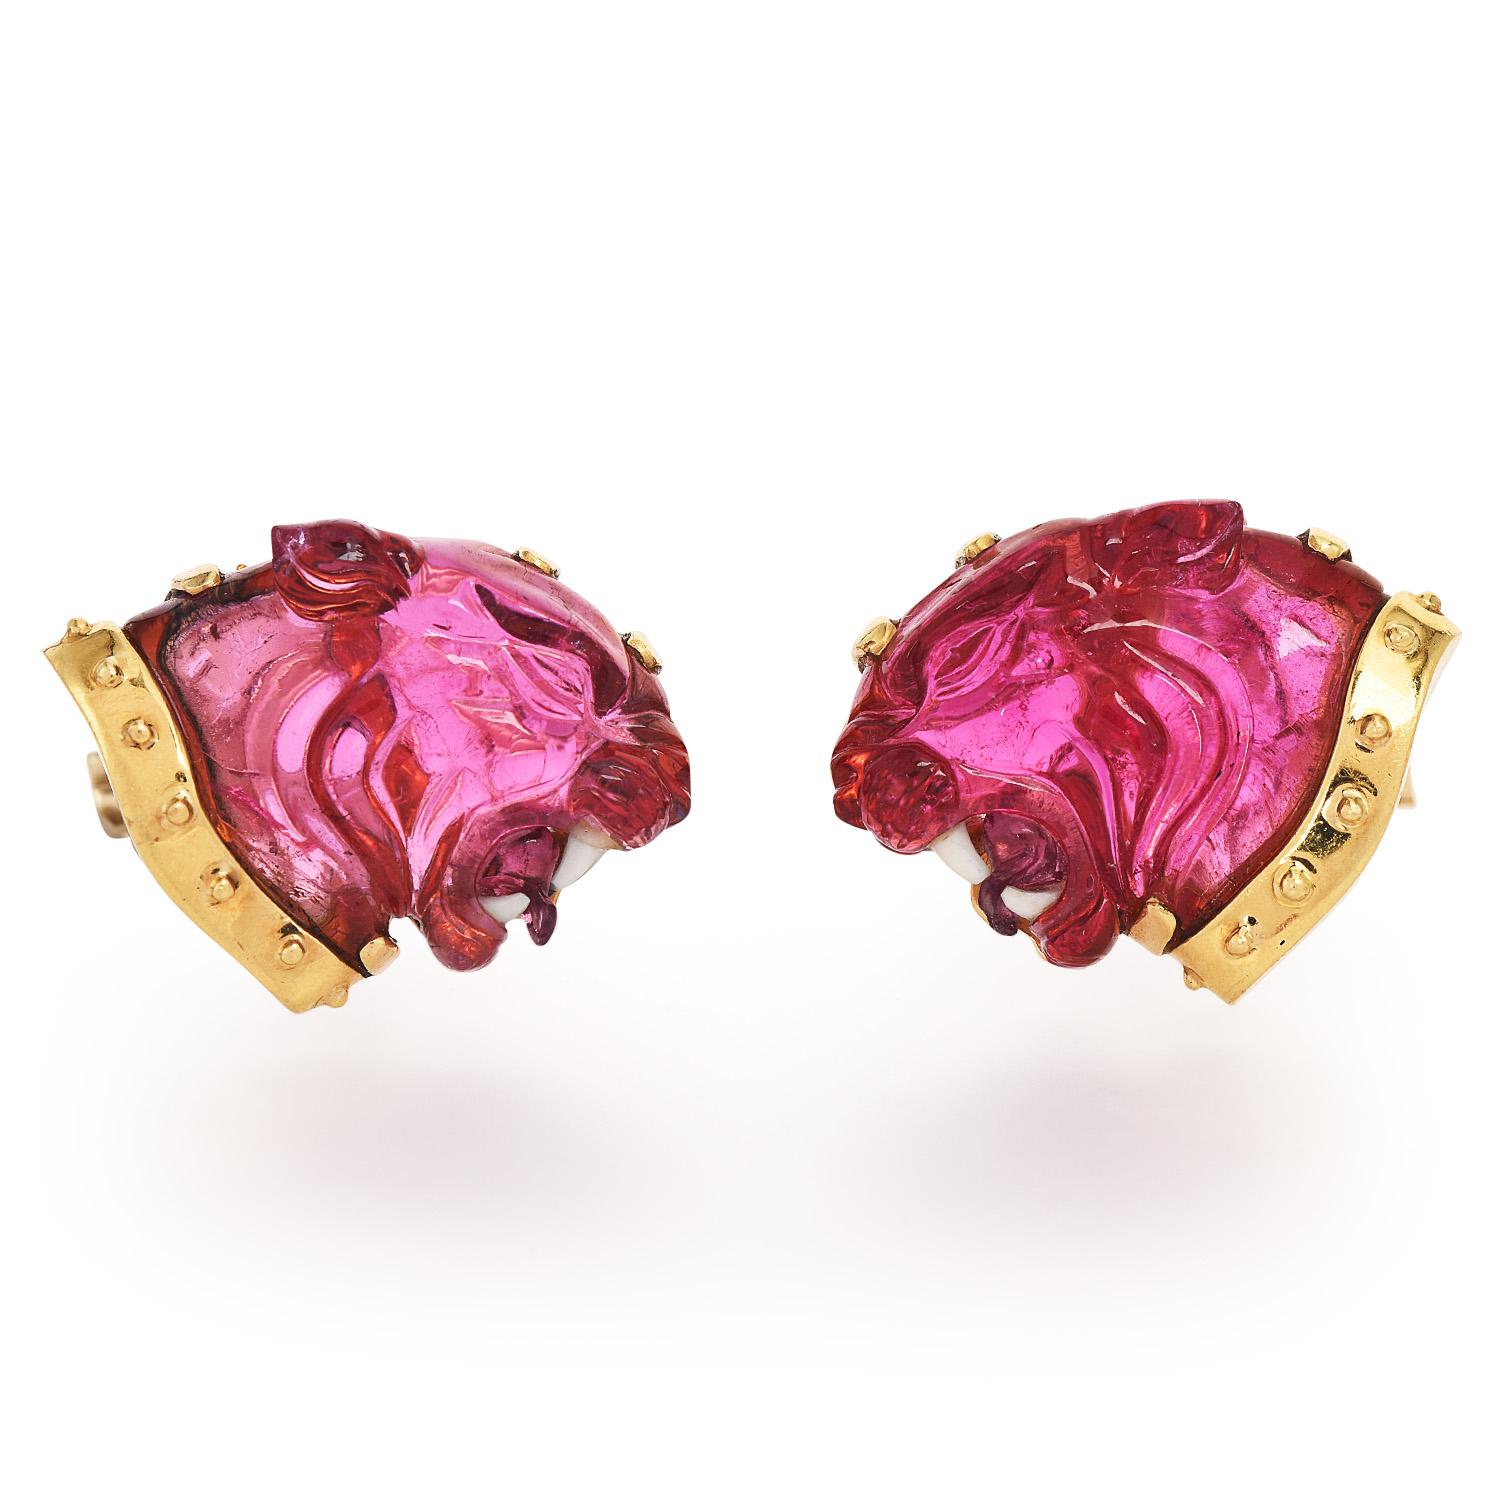 Strong & powerful, these vintage cufflinks are made for a unique person.

Are crafted in solid 18K yellow gold.

With two High Quality, Carved Cougar-head Pink tourmaline, carved stones weighing approx.22 carats and measuring  18 mm x 17 mm x